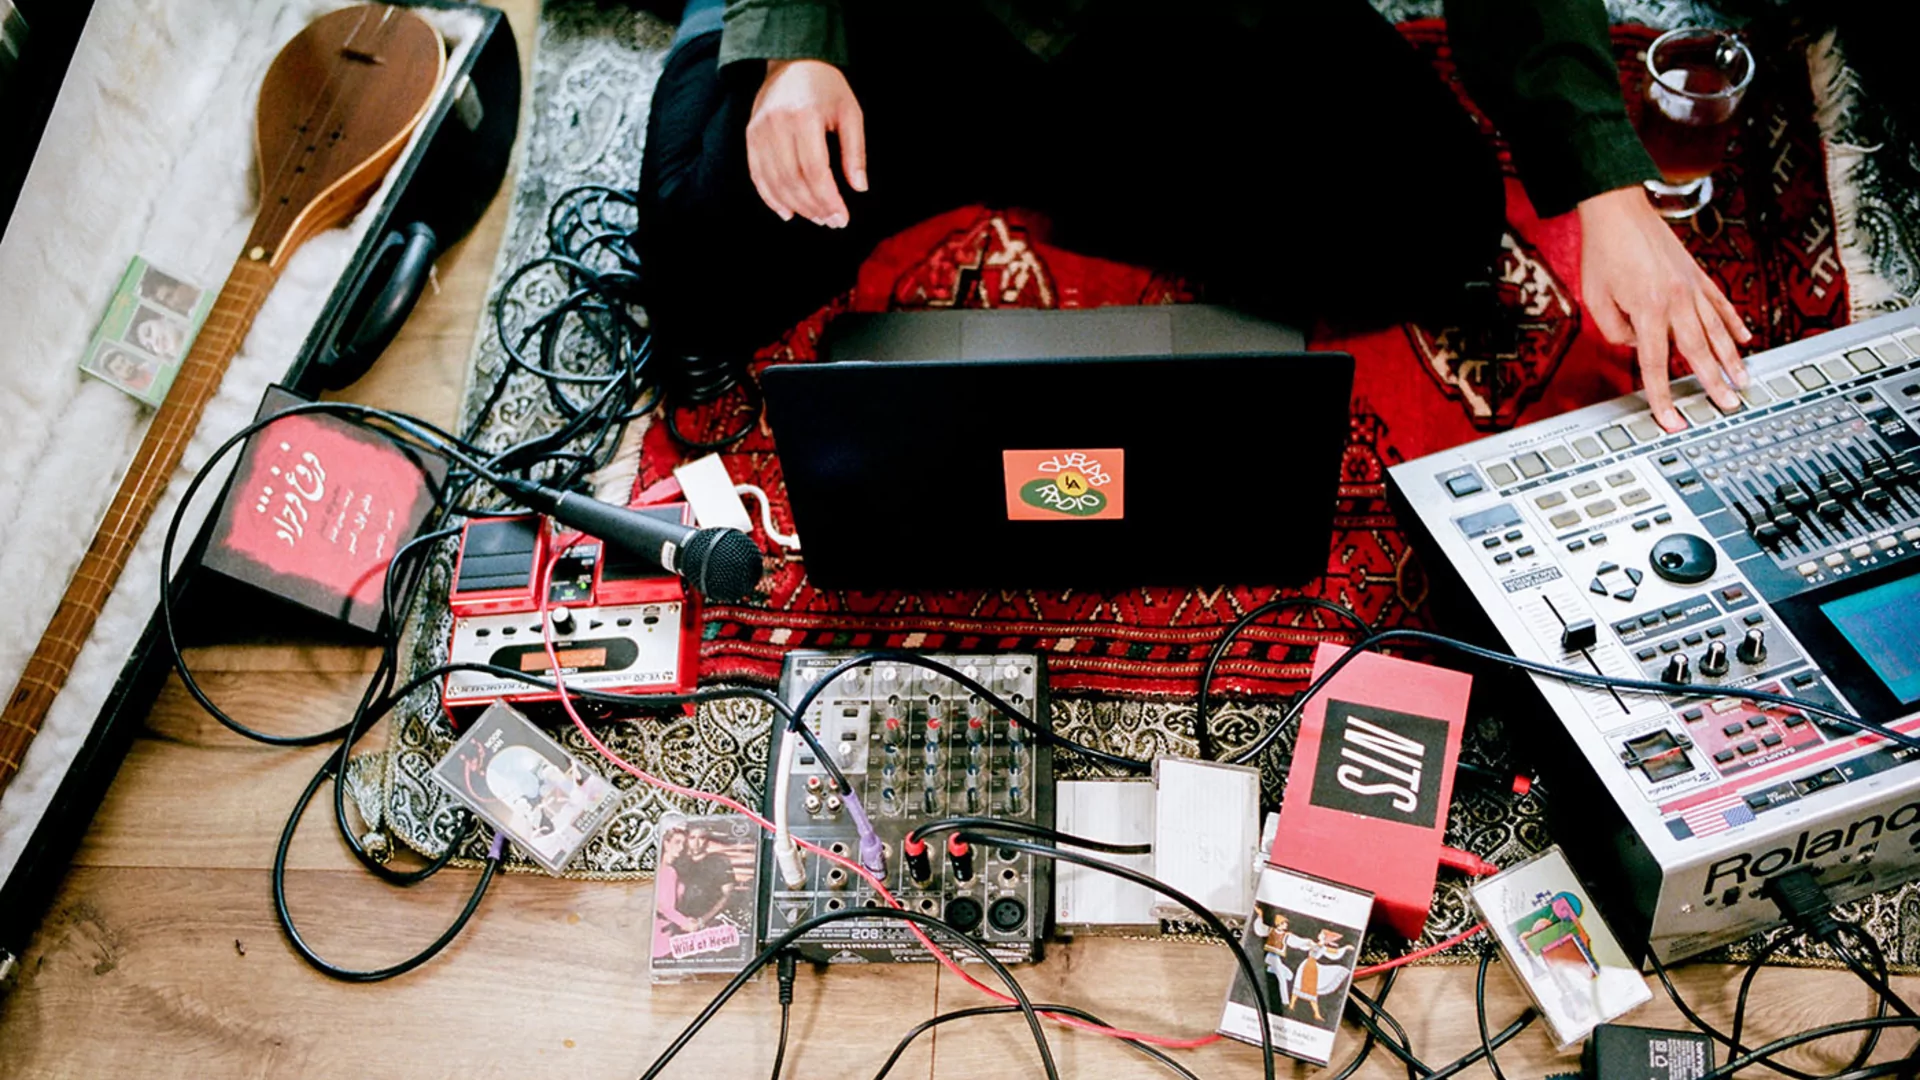 A photo looking down to Maral's laptop, sampler, pedals and cables on the floor